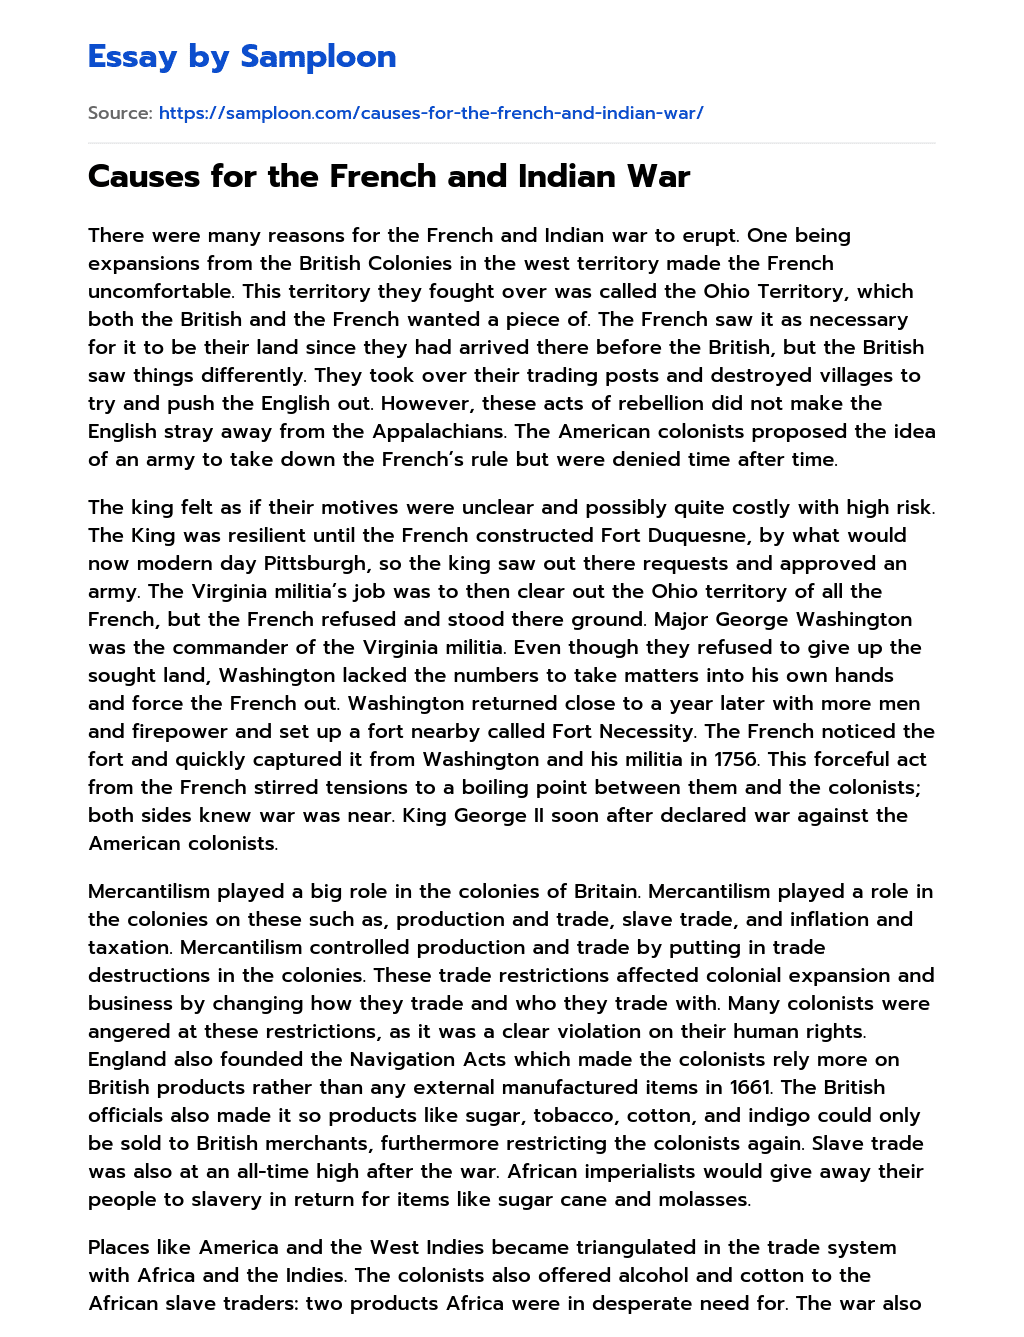 Causes for the French and Indian War essay